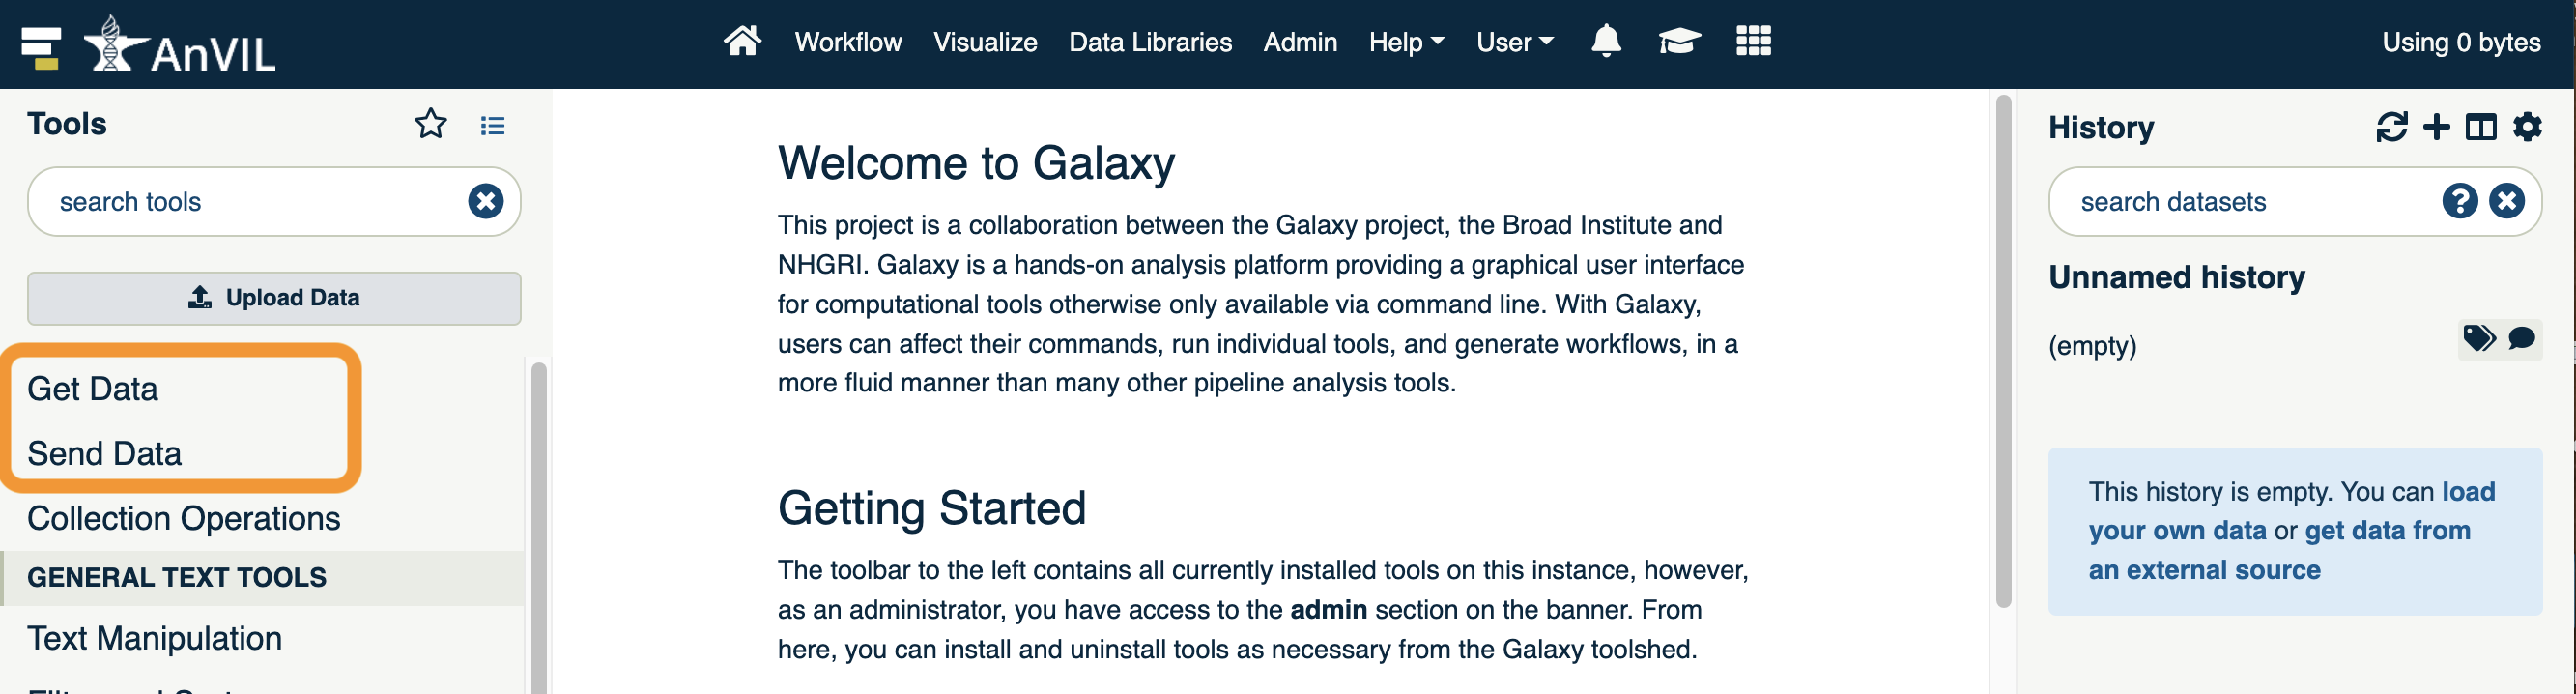 Copy-data-in-Galaxy-instance_Screen-shot.png